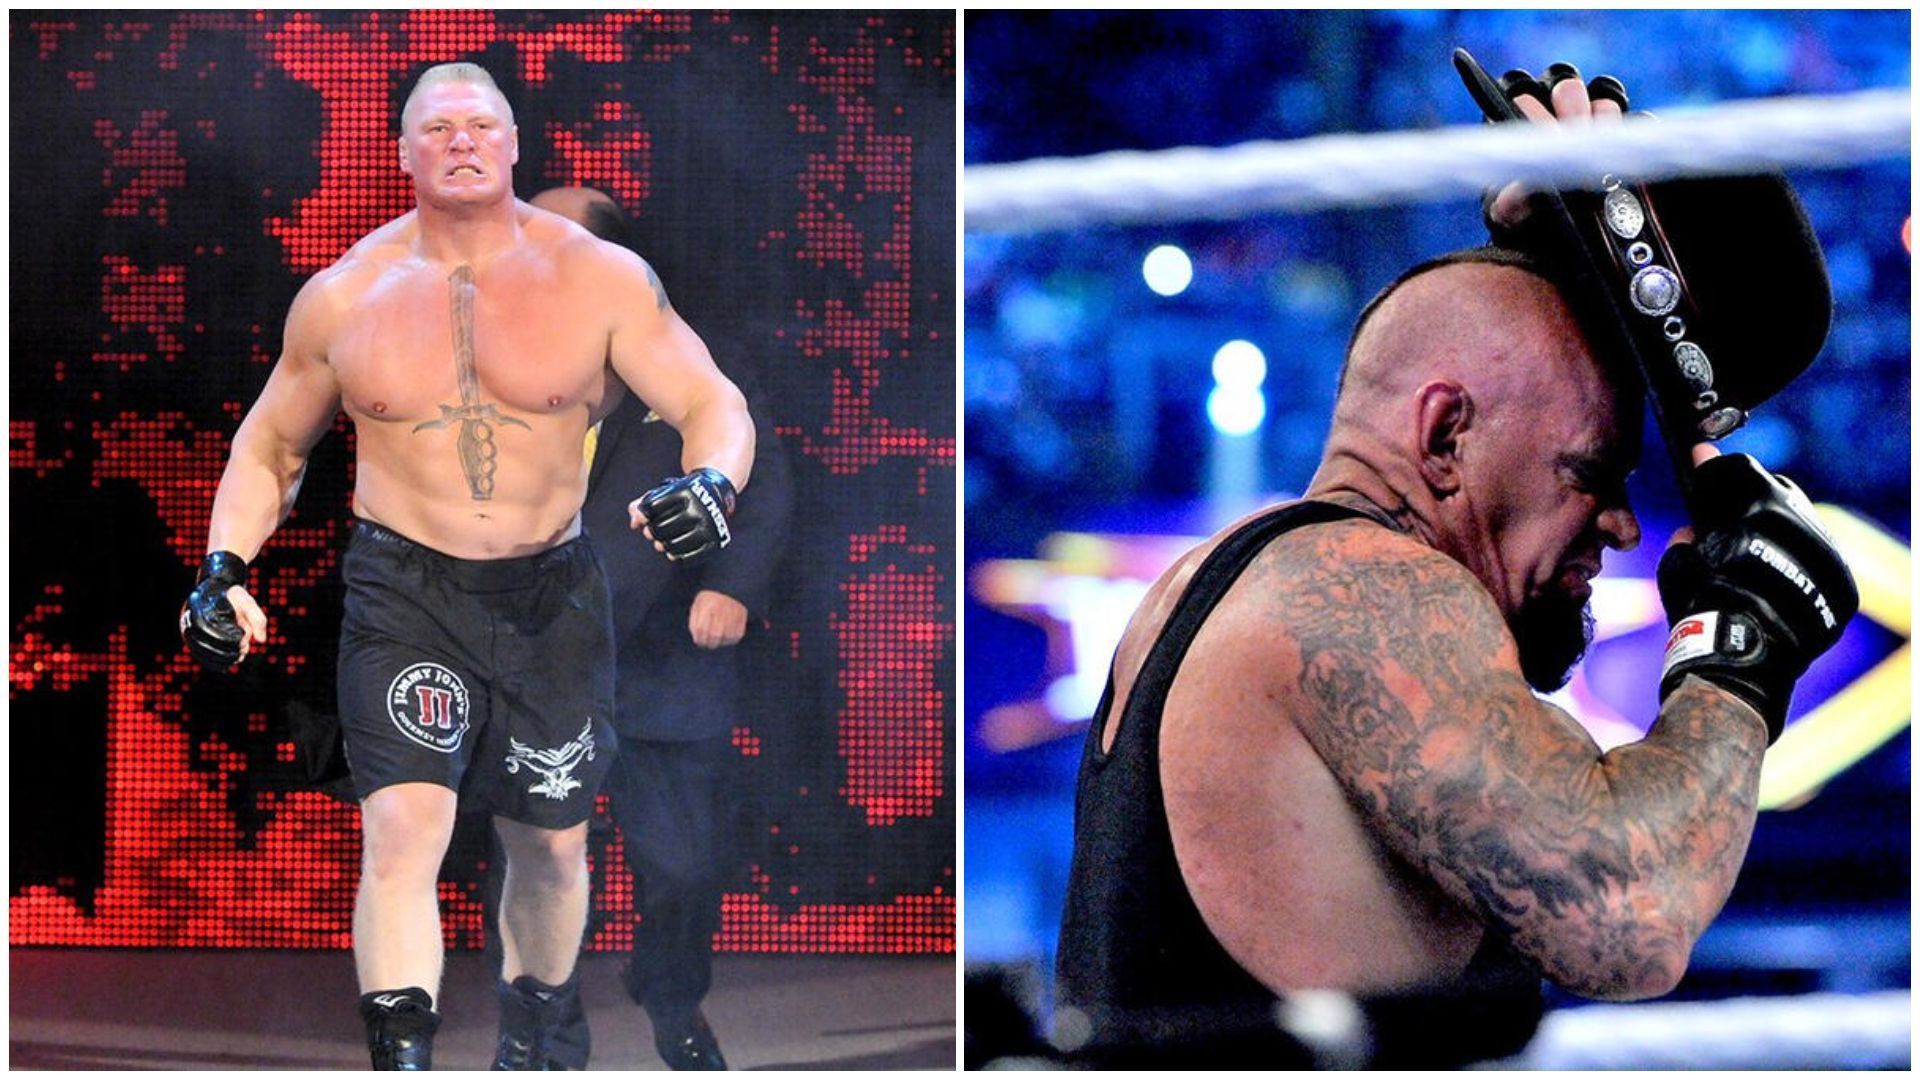 Brock Lesnar (left), and The Undertaker (right) [Image credits - WWE.com]